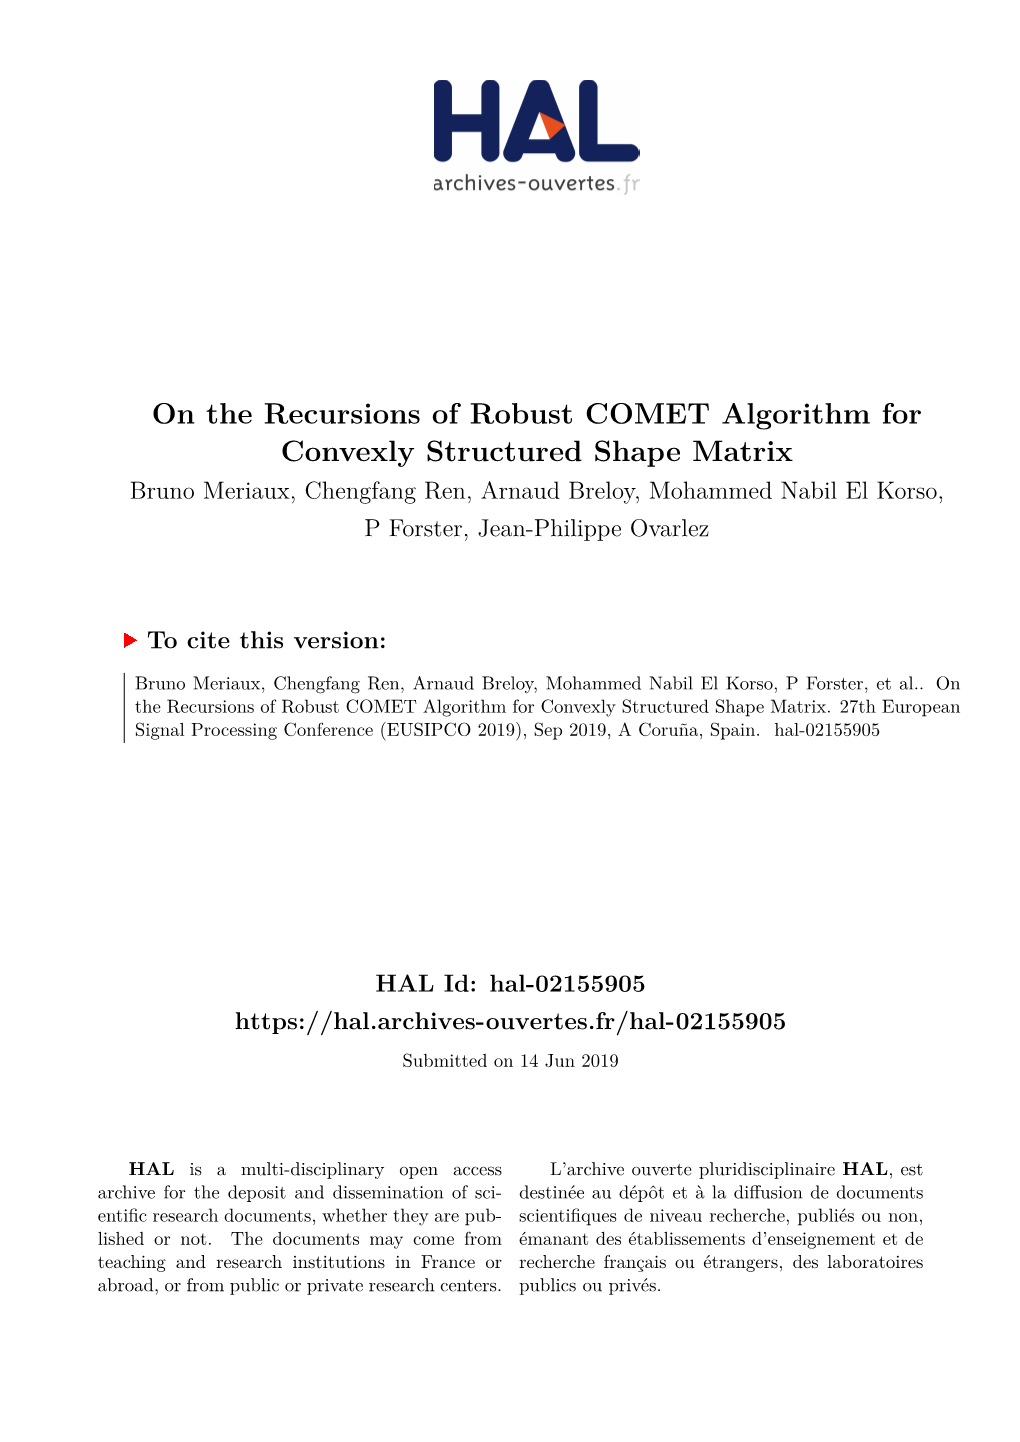 On the Recursions of Robust COMET Algorithm for Convexly Structured